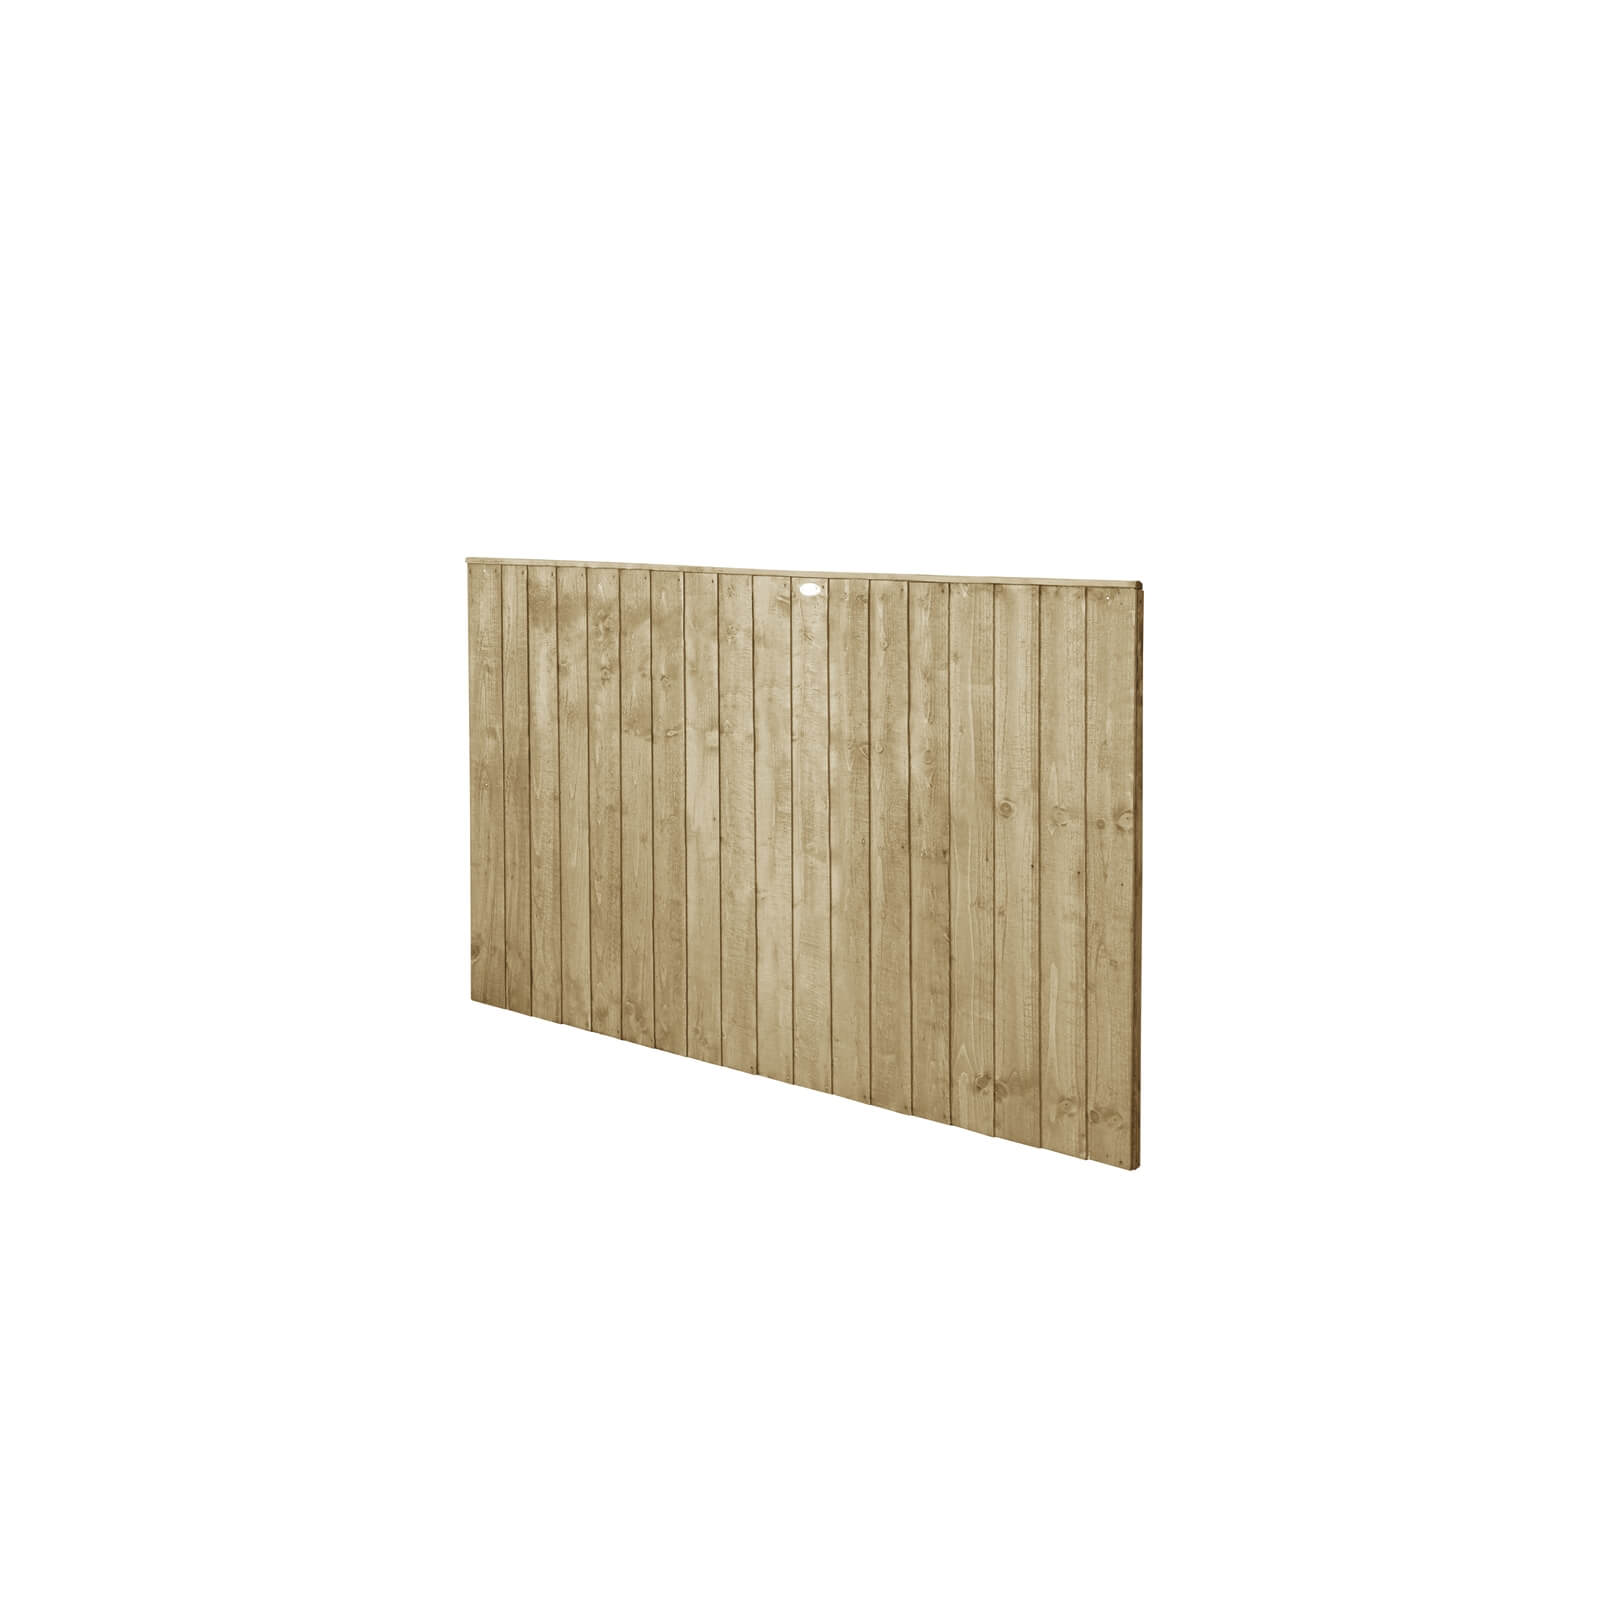 6ft x 4ft (1.83m x 1.23m) Pressure Treated Featheredge Fence Panel - Pack of 3